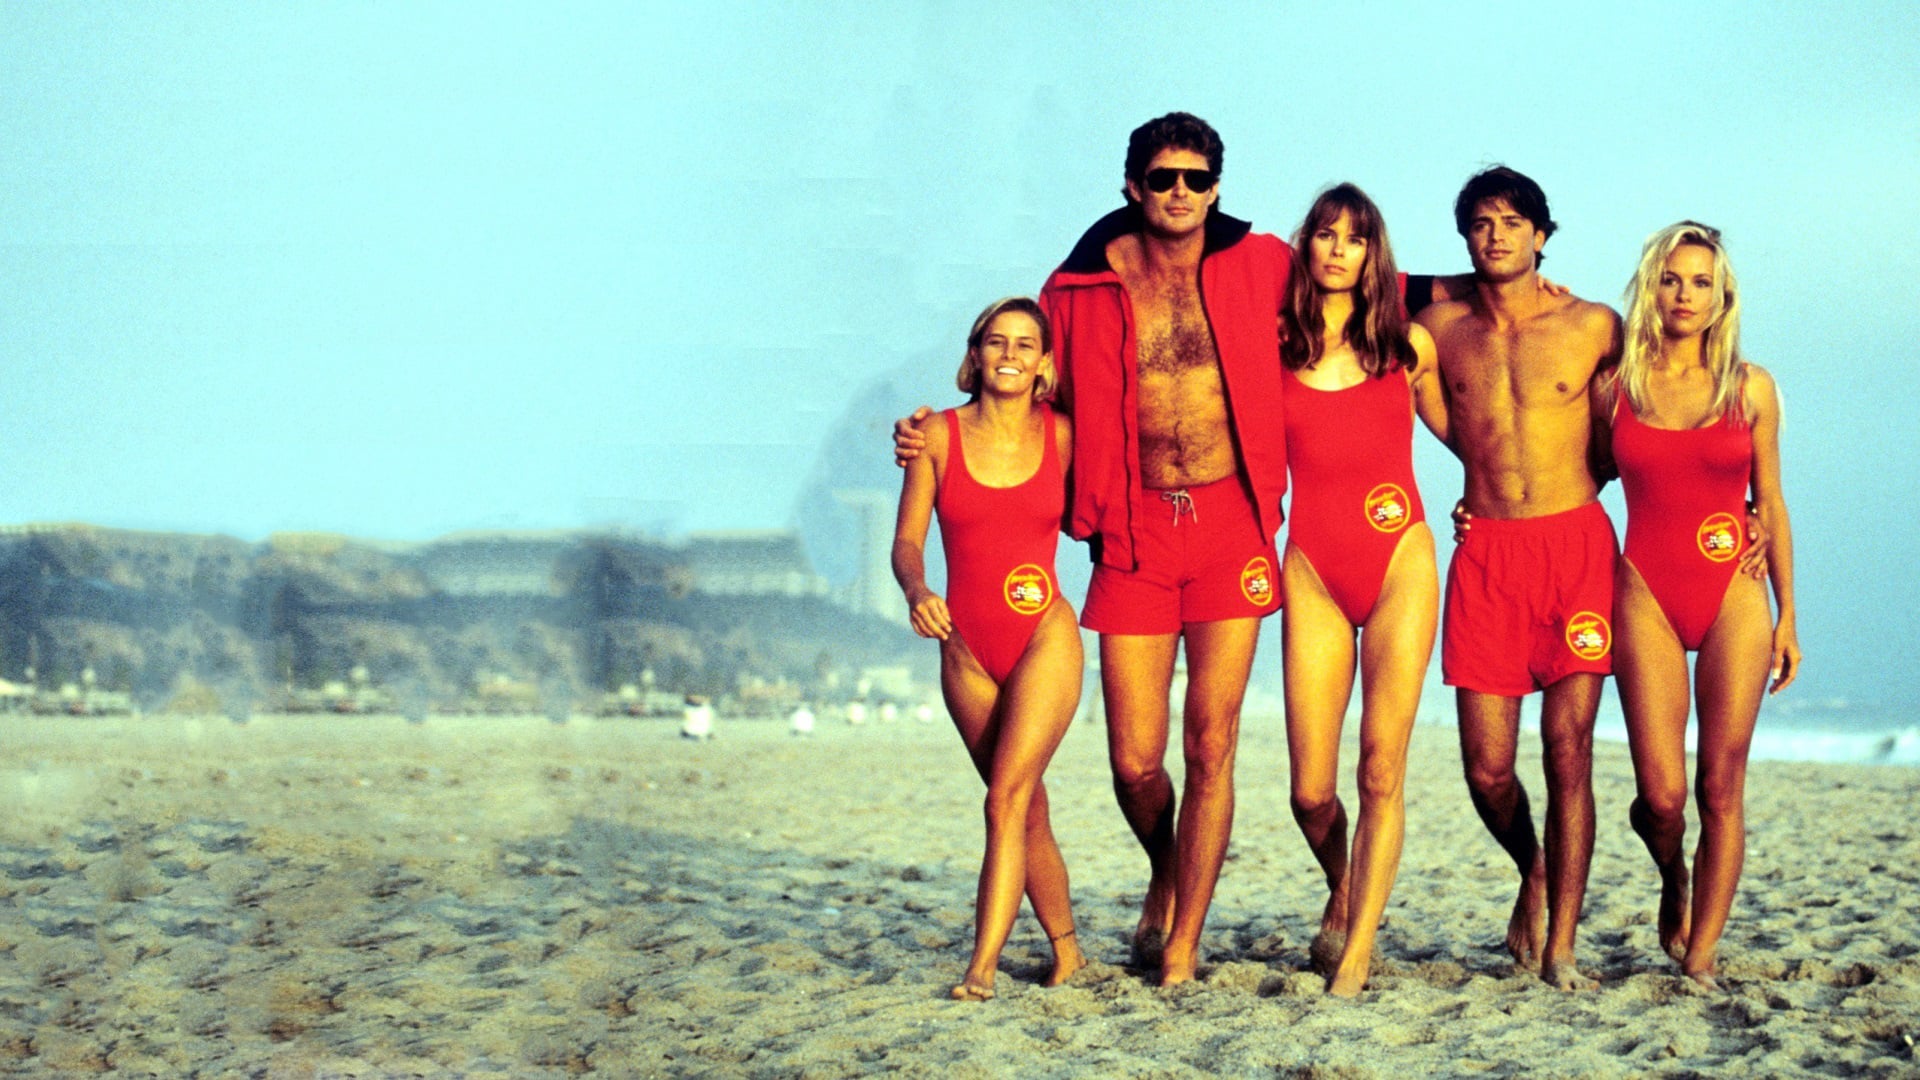 baywatch theme song download